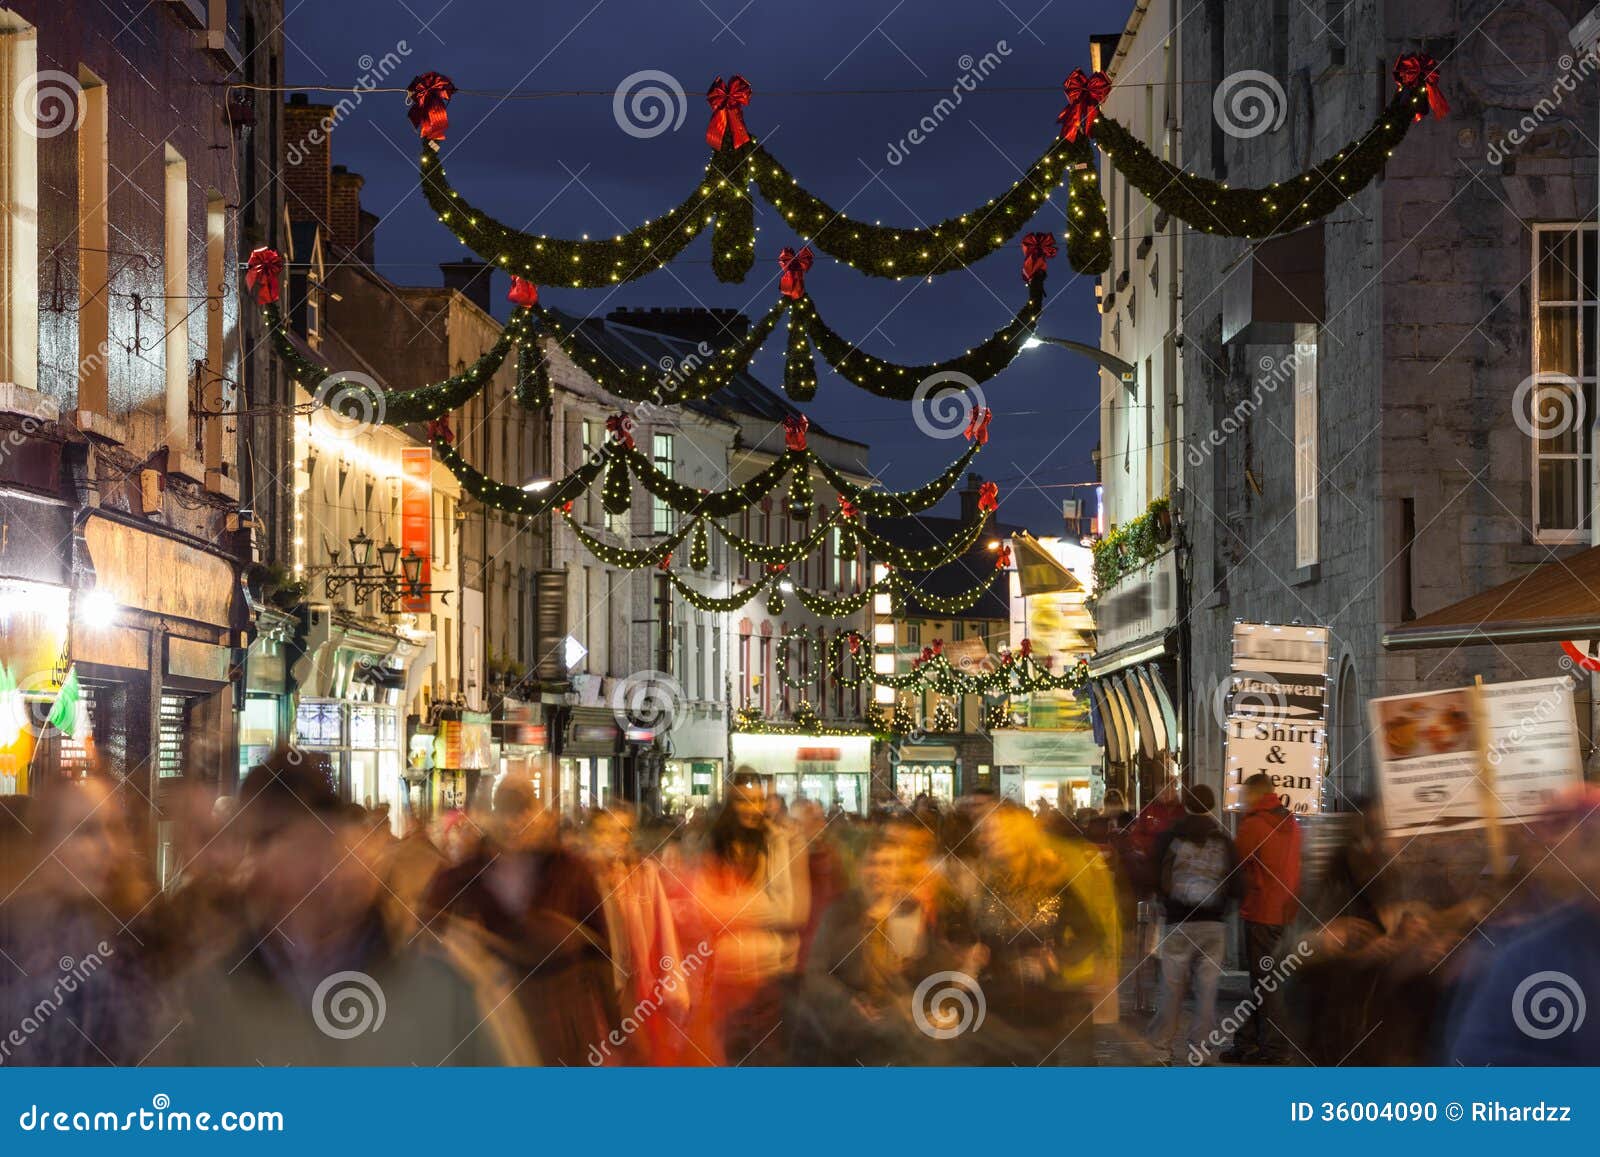 Shop Street At Night Galway Stock Photo Image 36004090